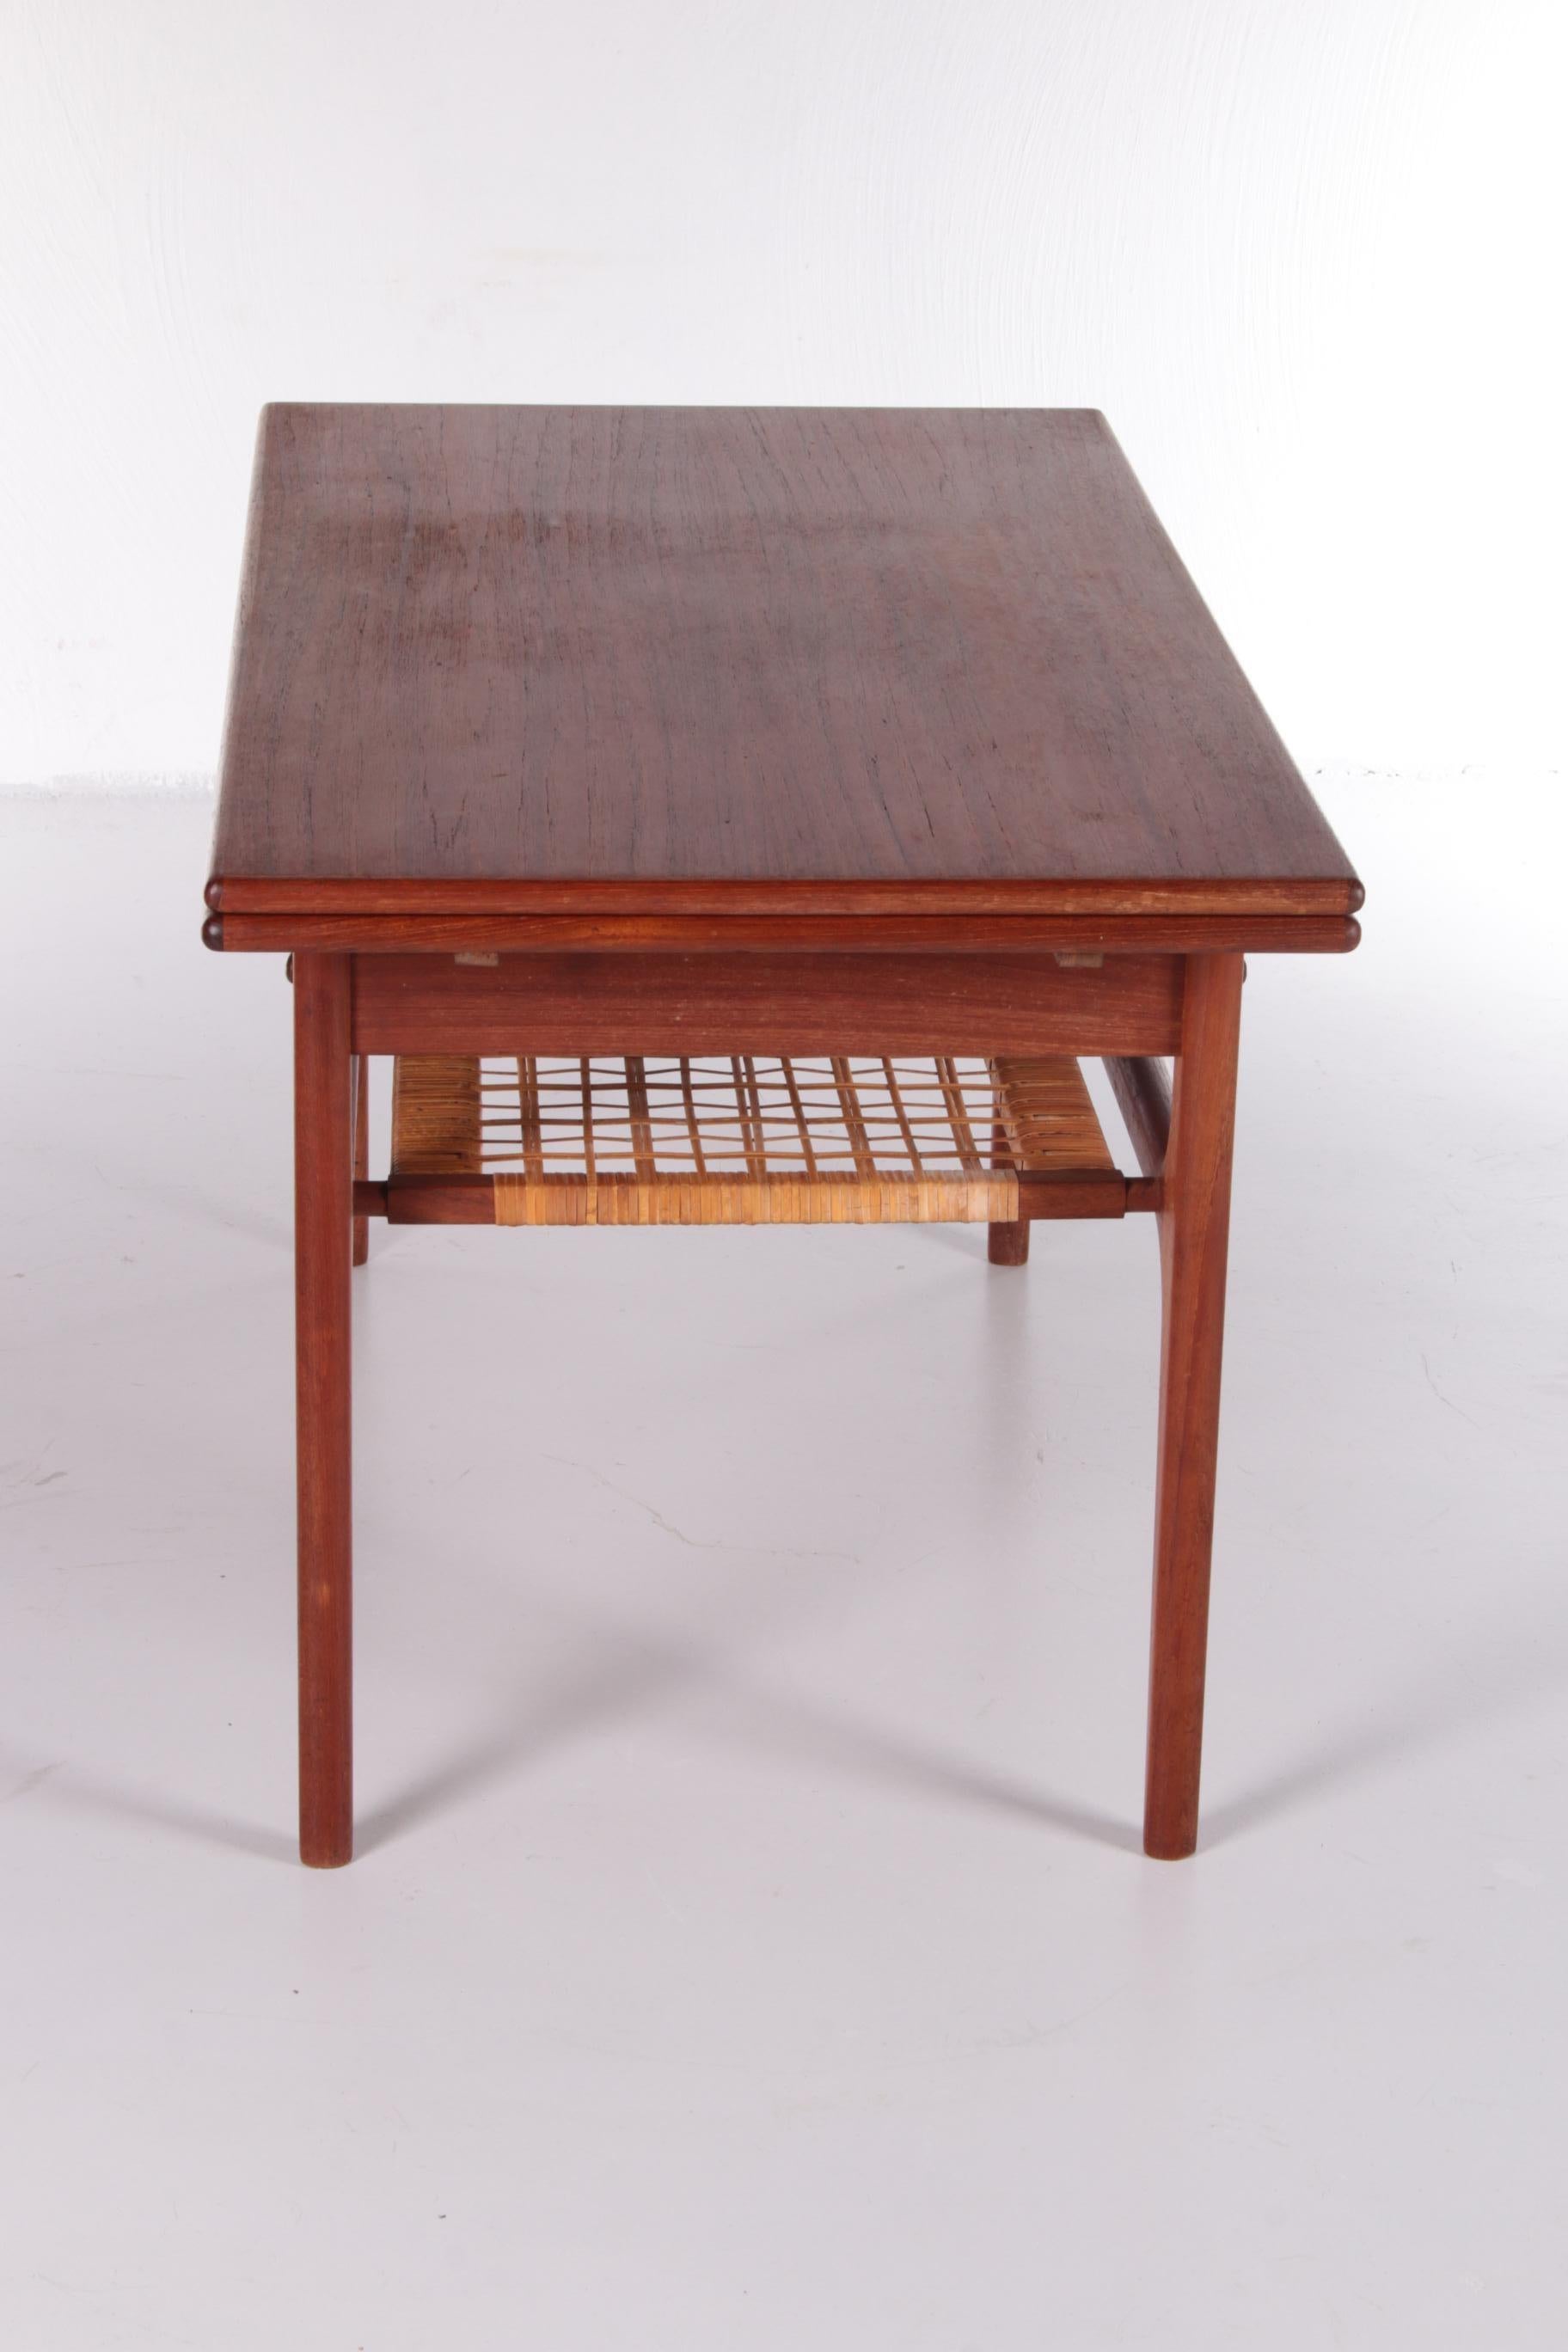 Mid-20th Century Danish Design Coffee Table made by Trioh Denmark For Sale